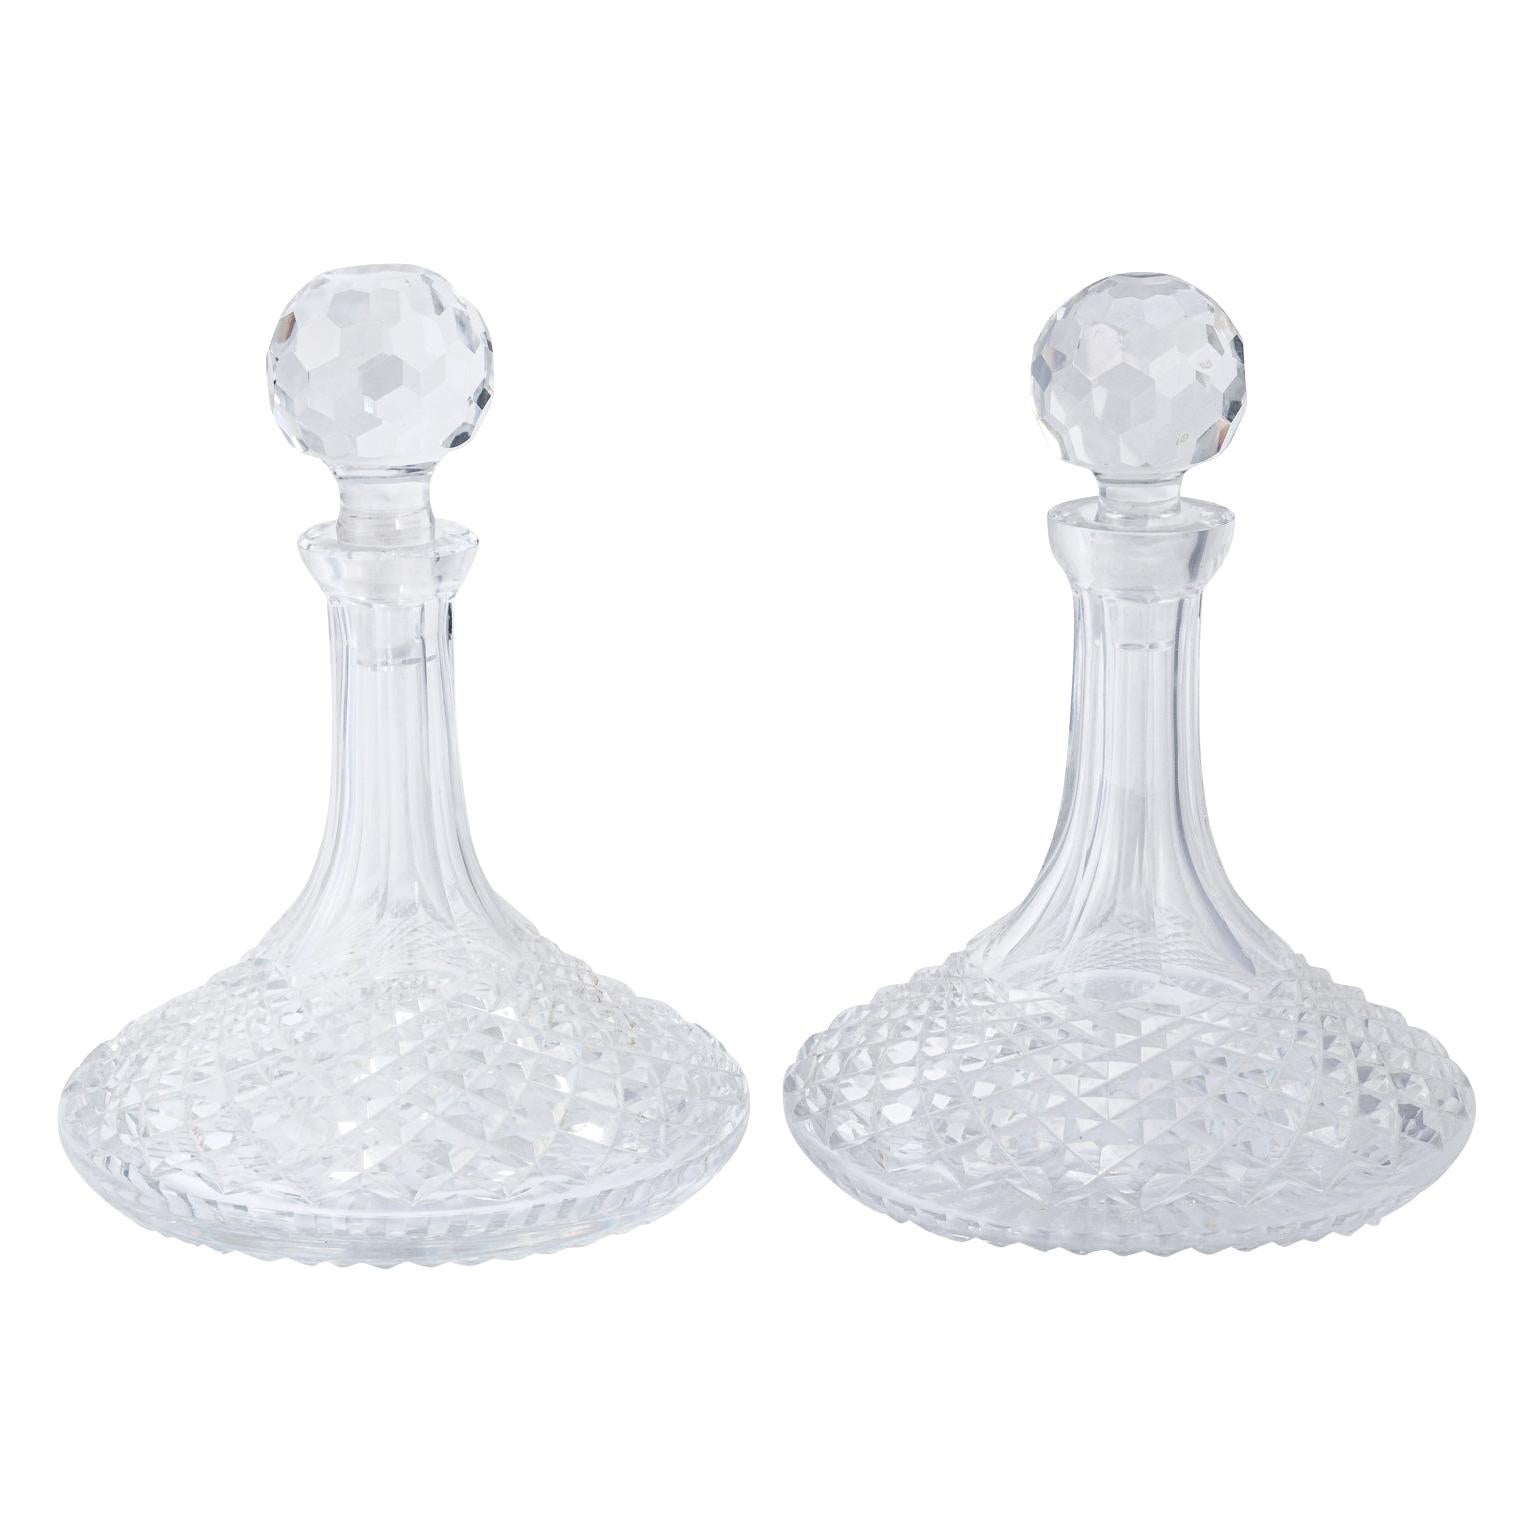 Pair of Cut Crystal Decanters